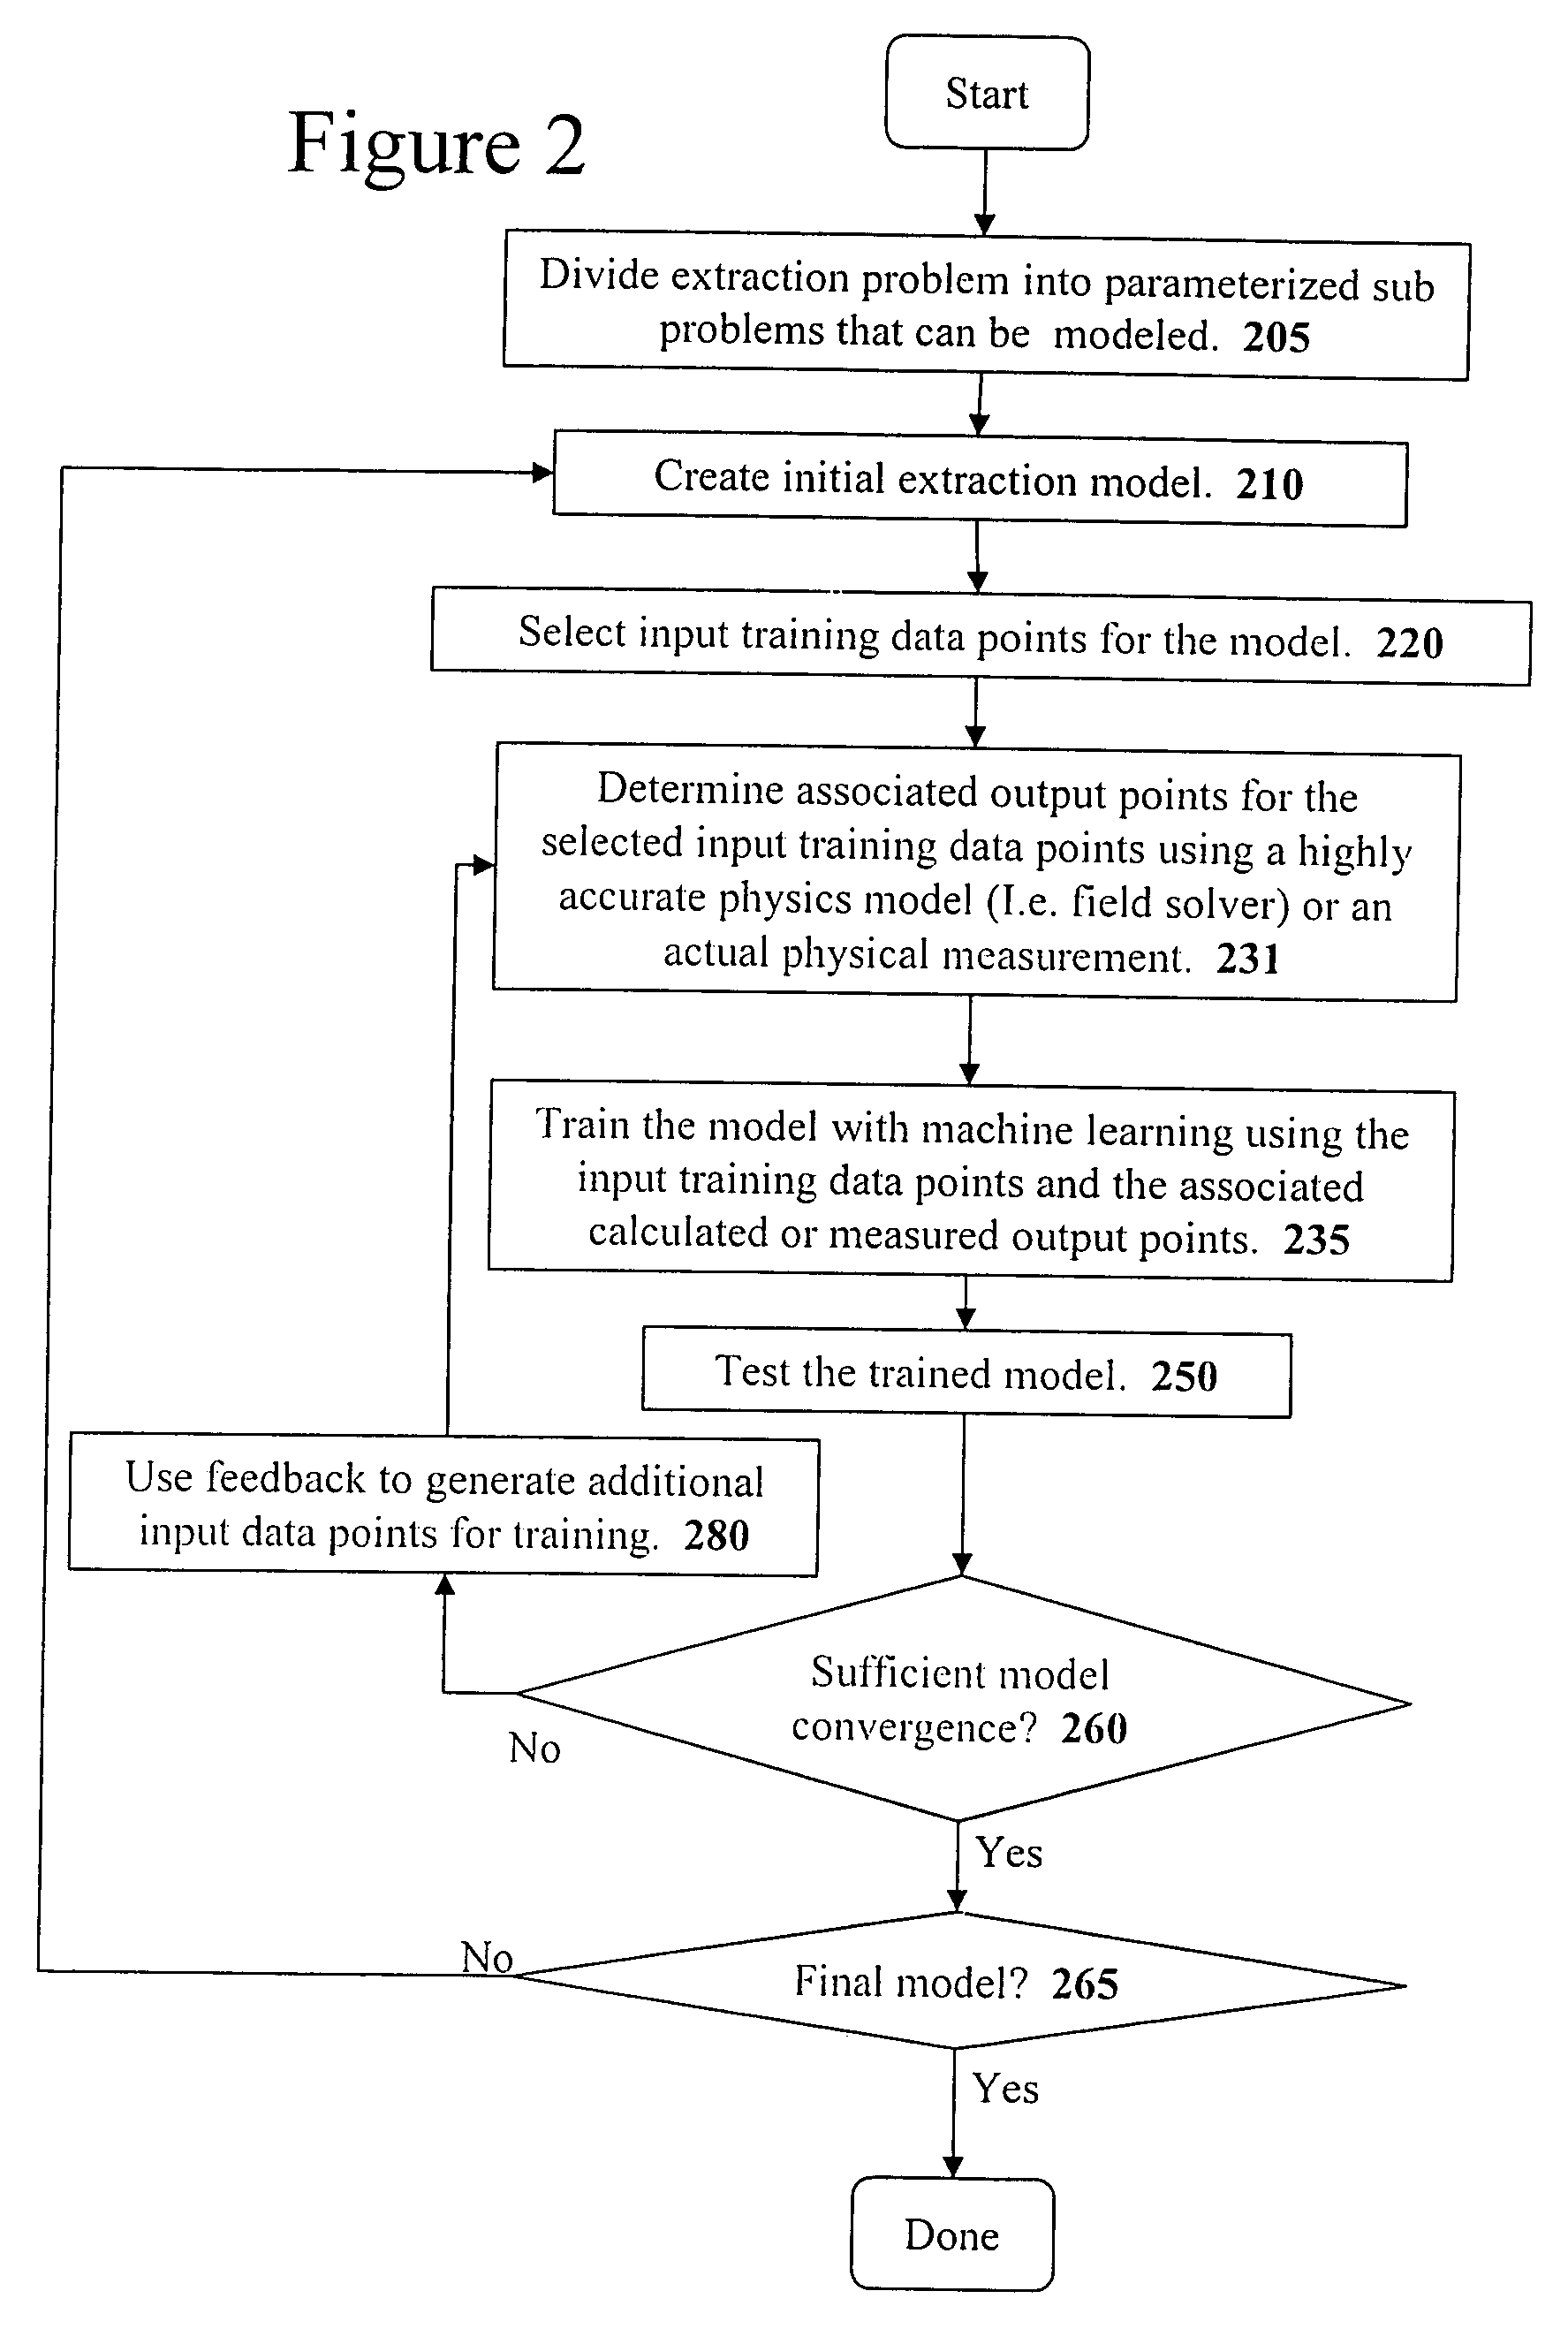 Method and apparatus for creating an extraction model using Bayesian inference implemented with the Hybrid Monte Carlo method